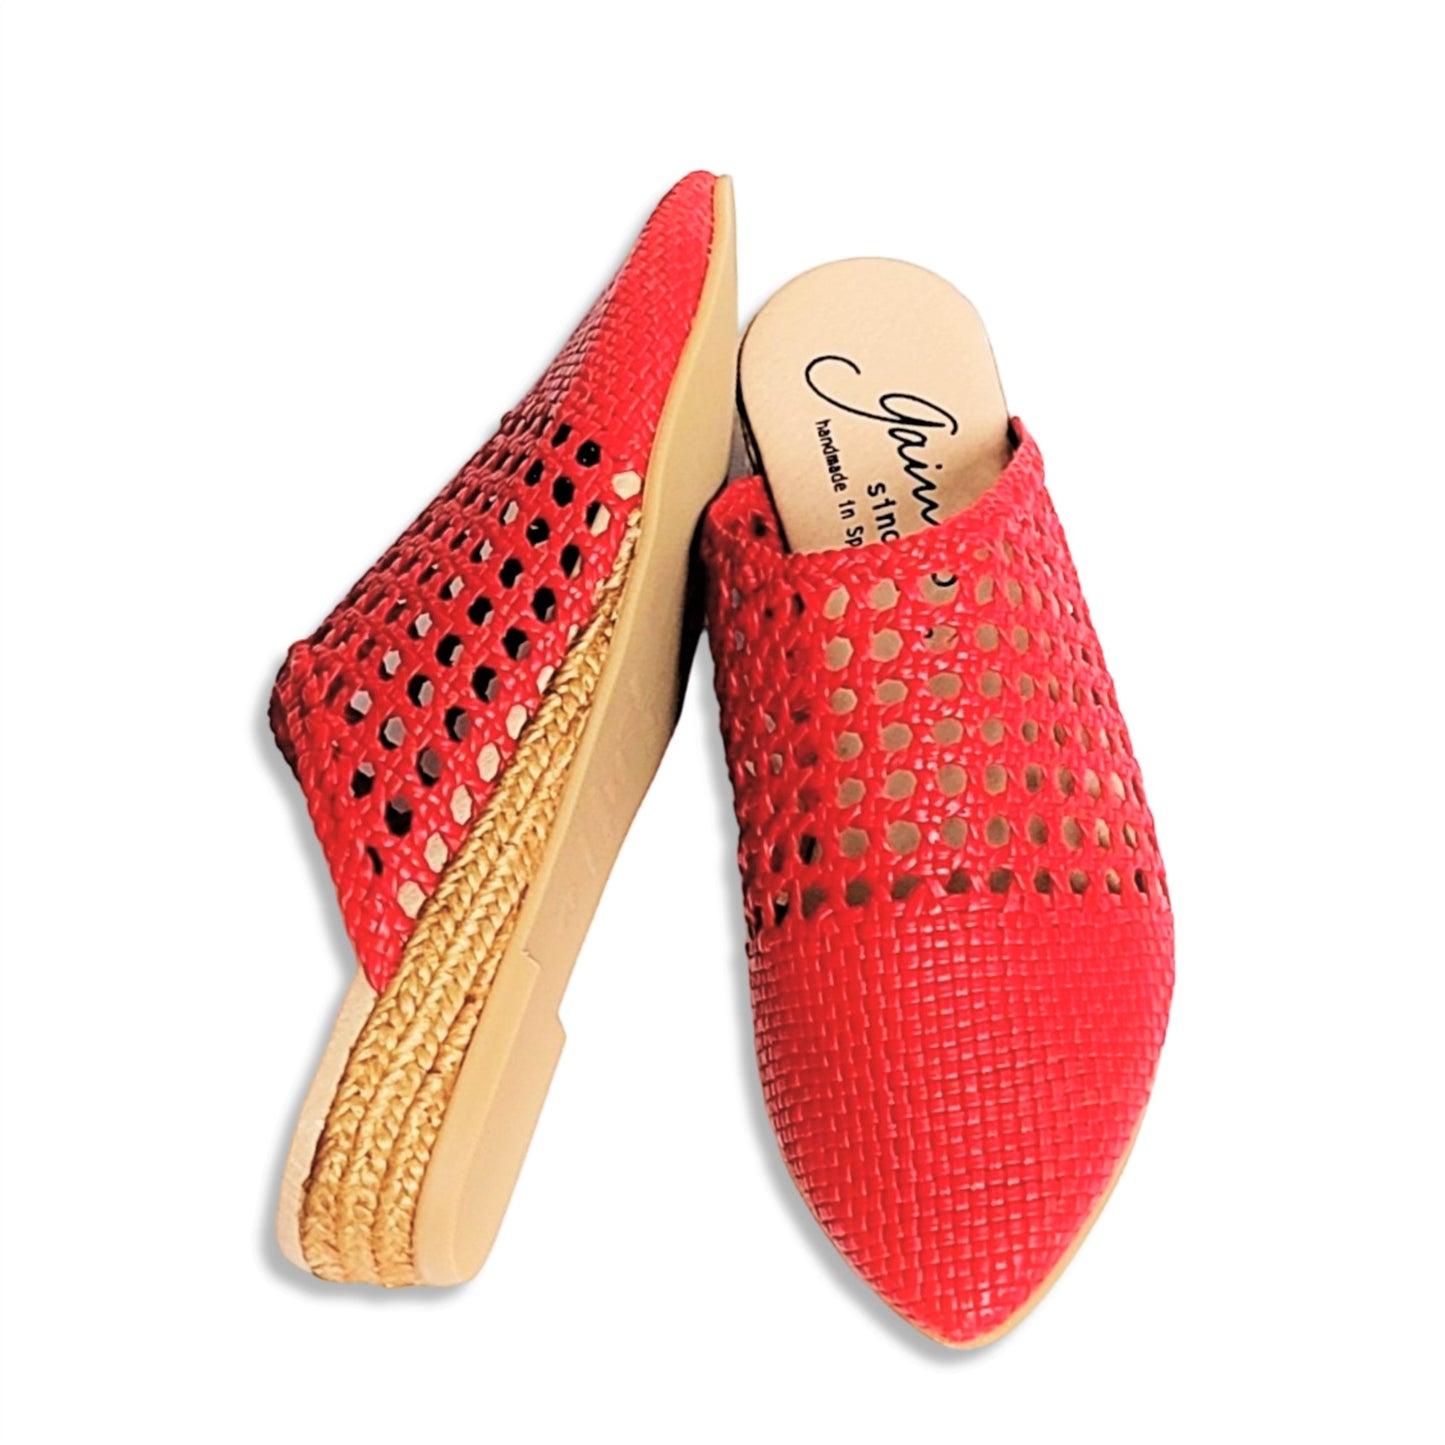 GAIMO Made In Spain Woven Pointy Toe Leather Espadrilles